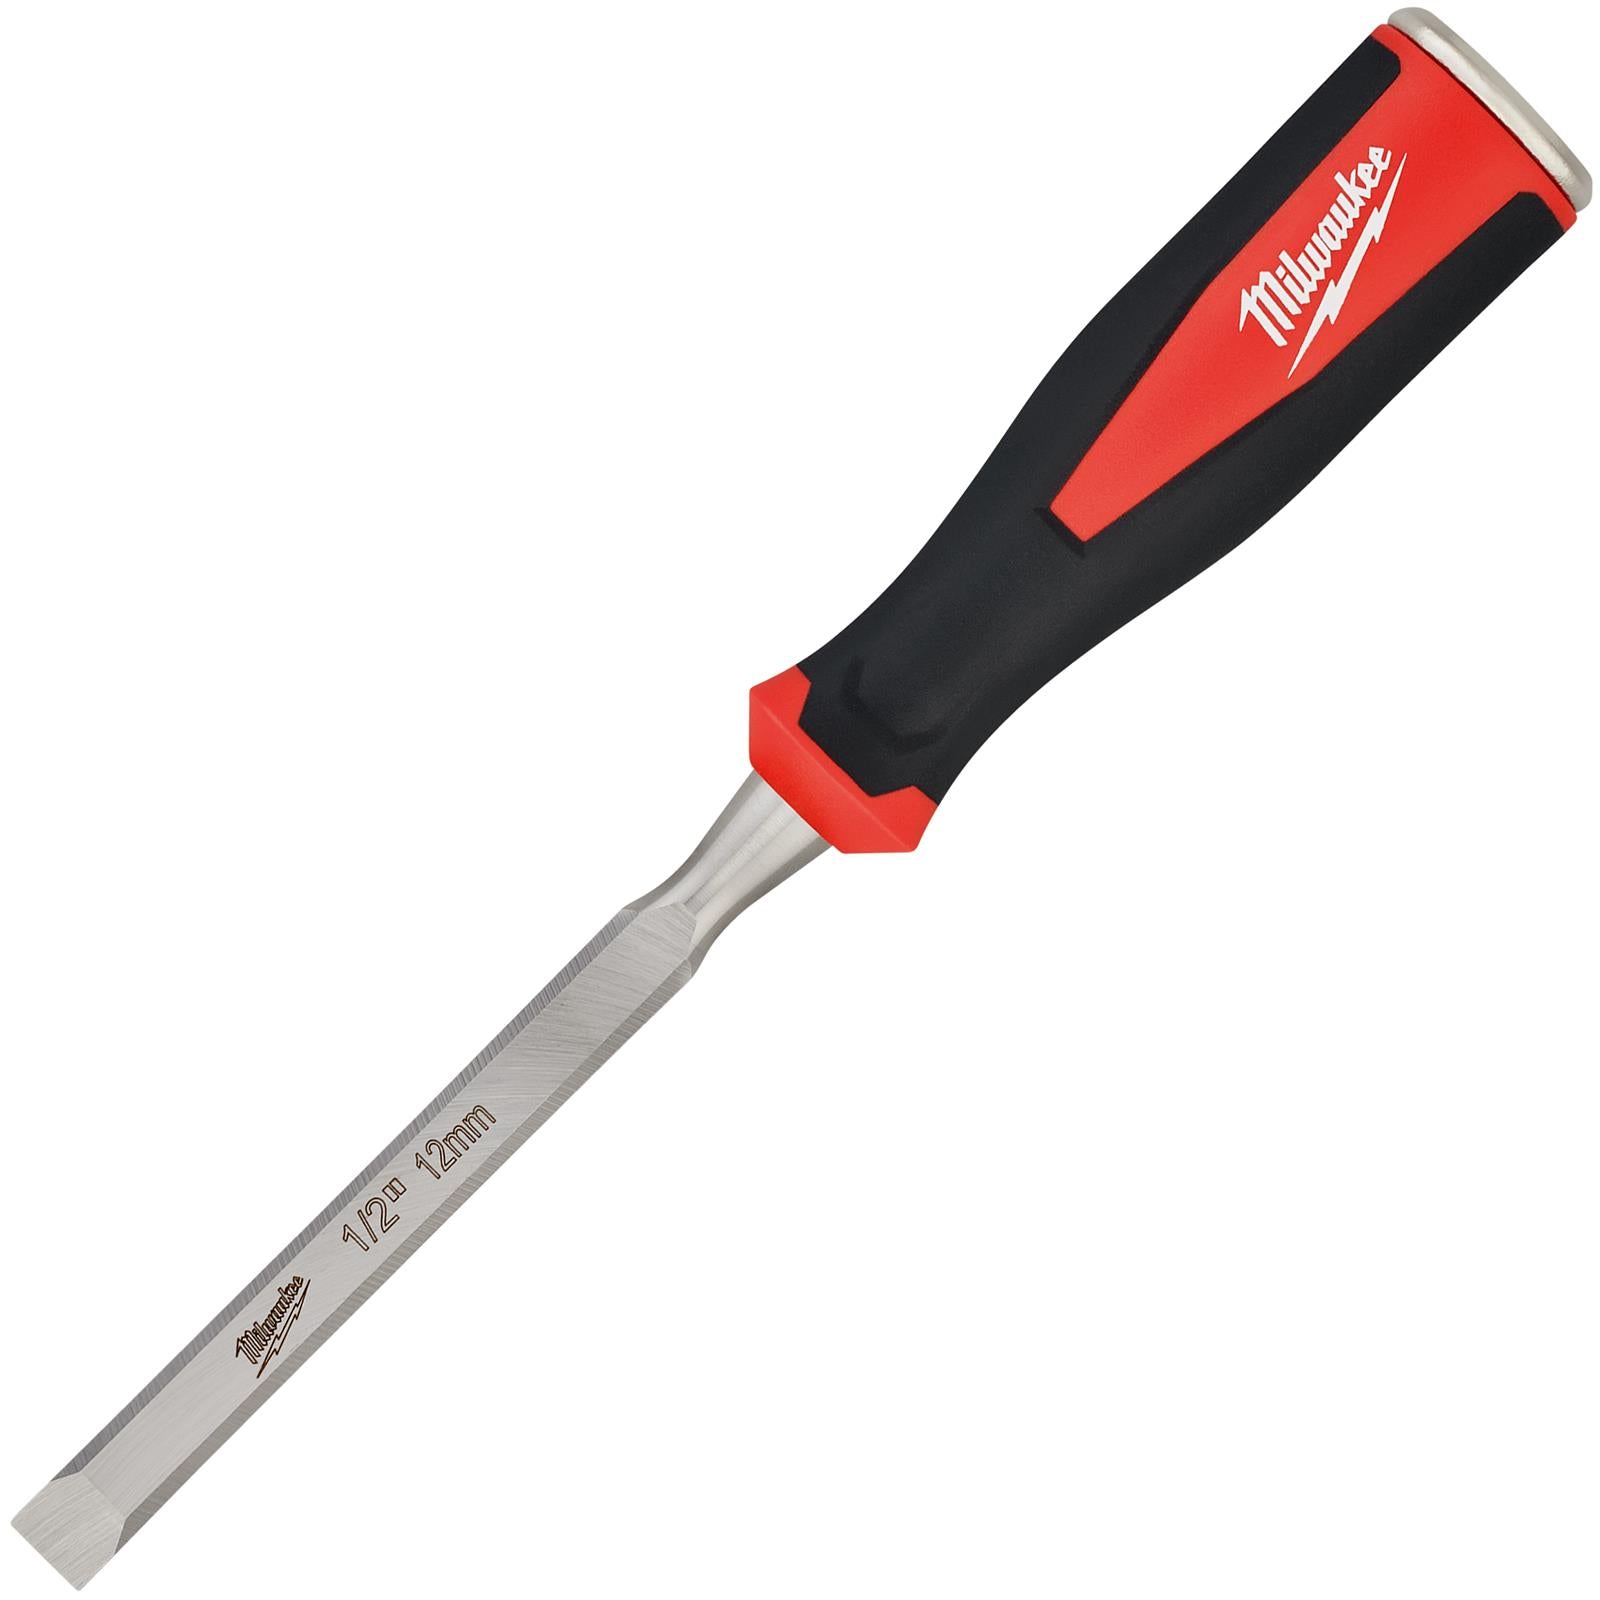 Milwaukee Beveled Edge Wood Chisel 12mm 1/2" All Metal Core with Striking Cap